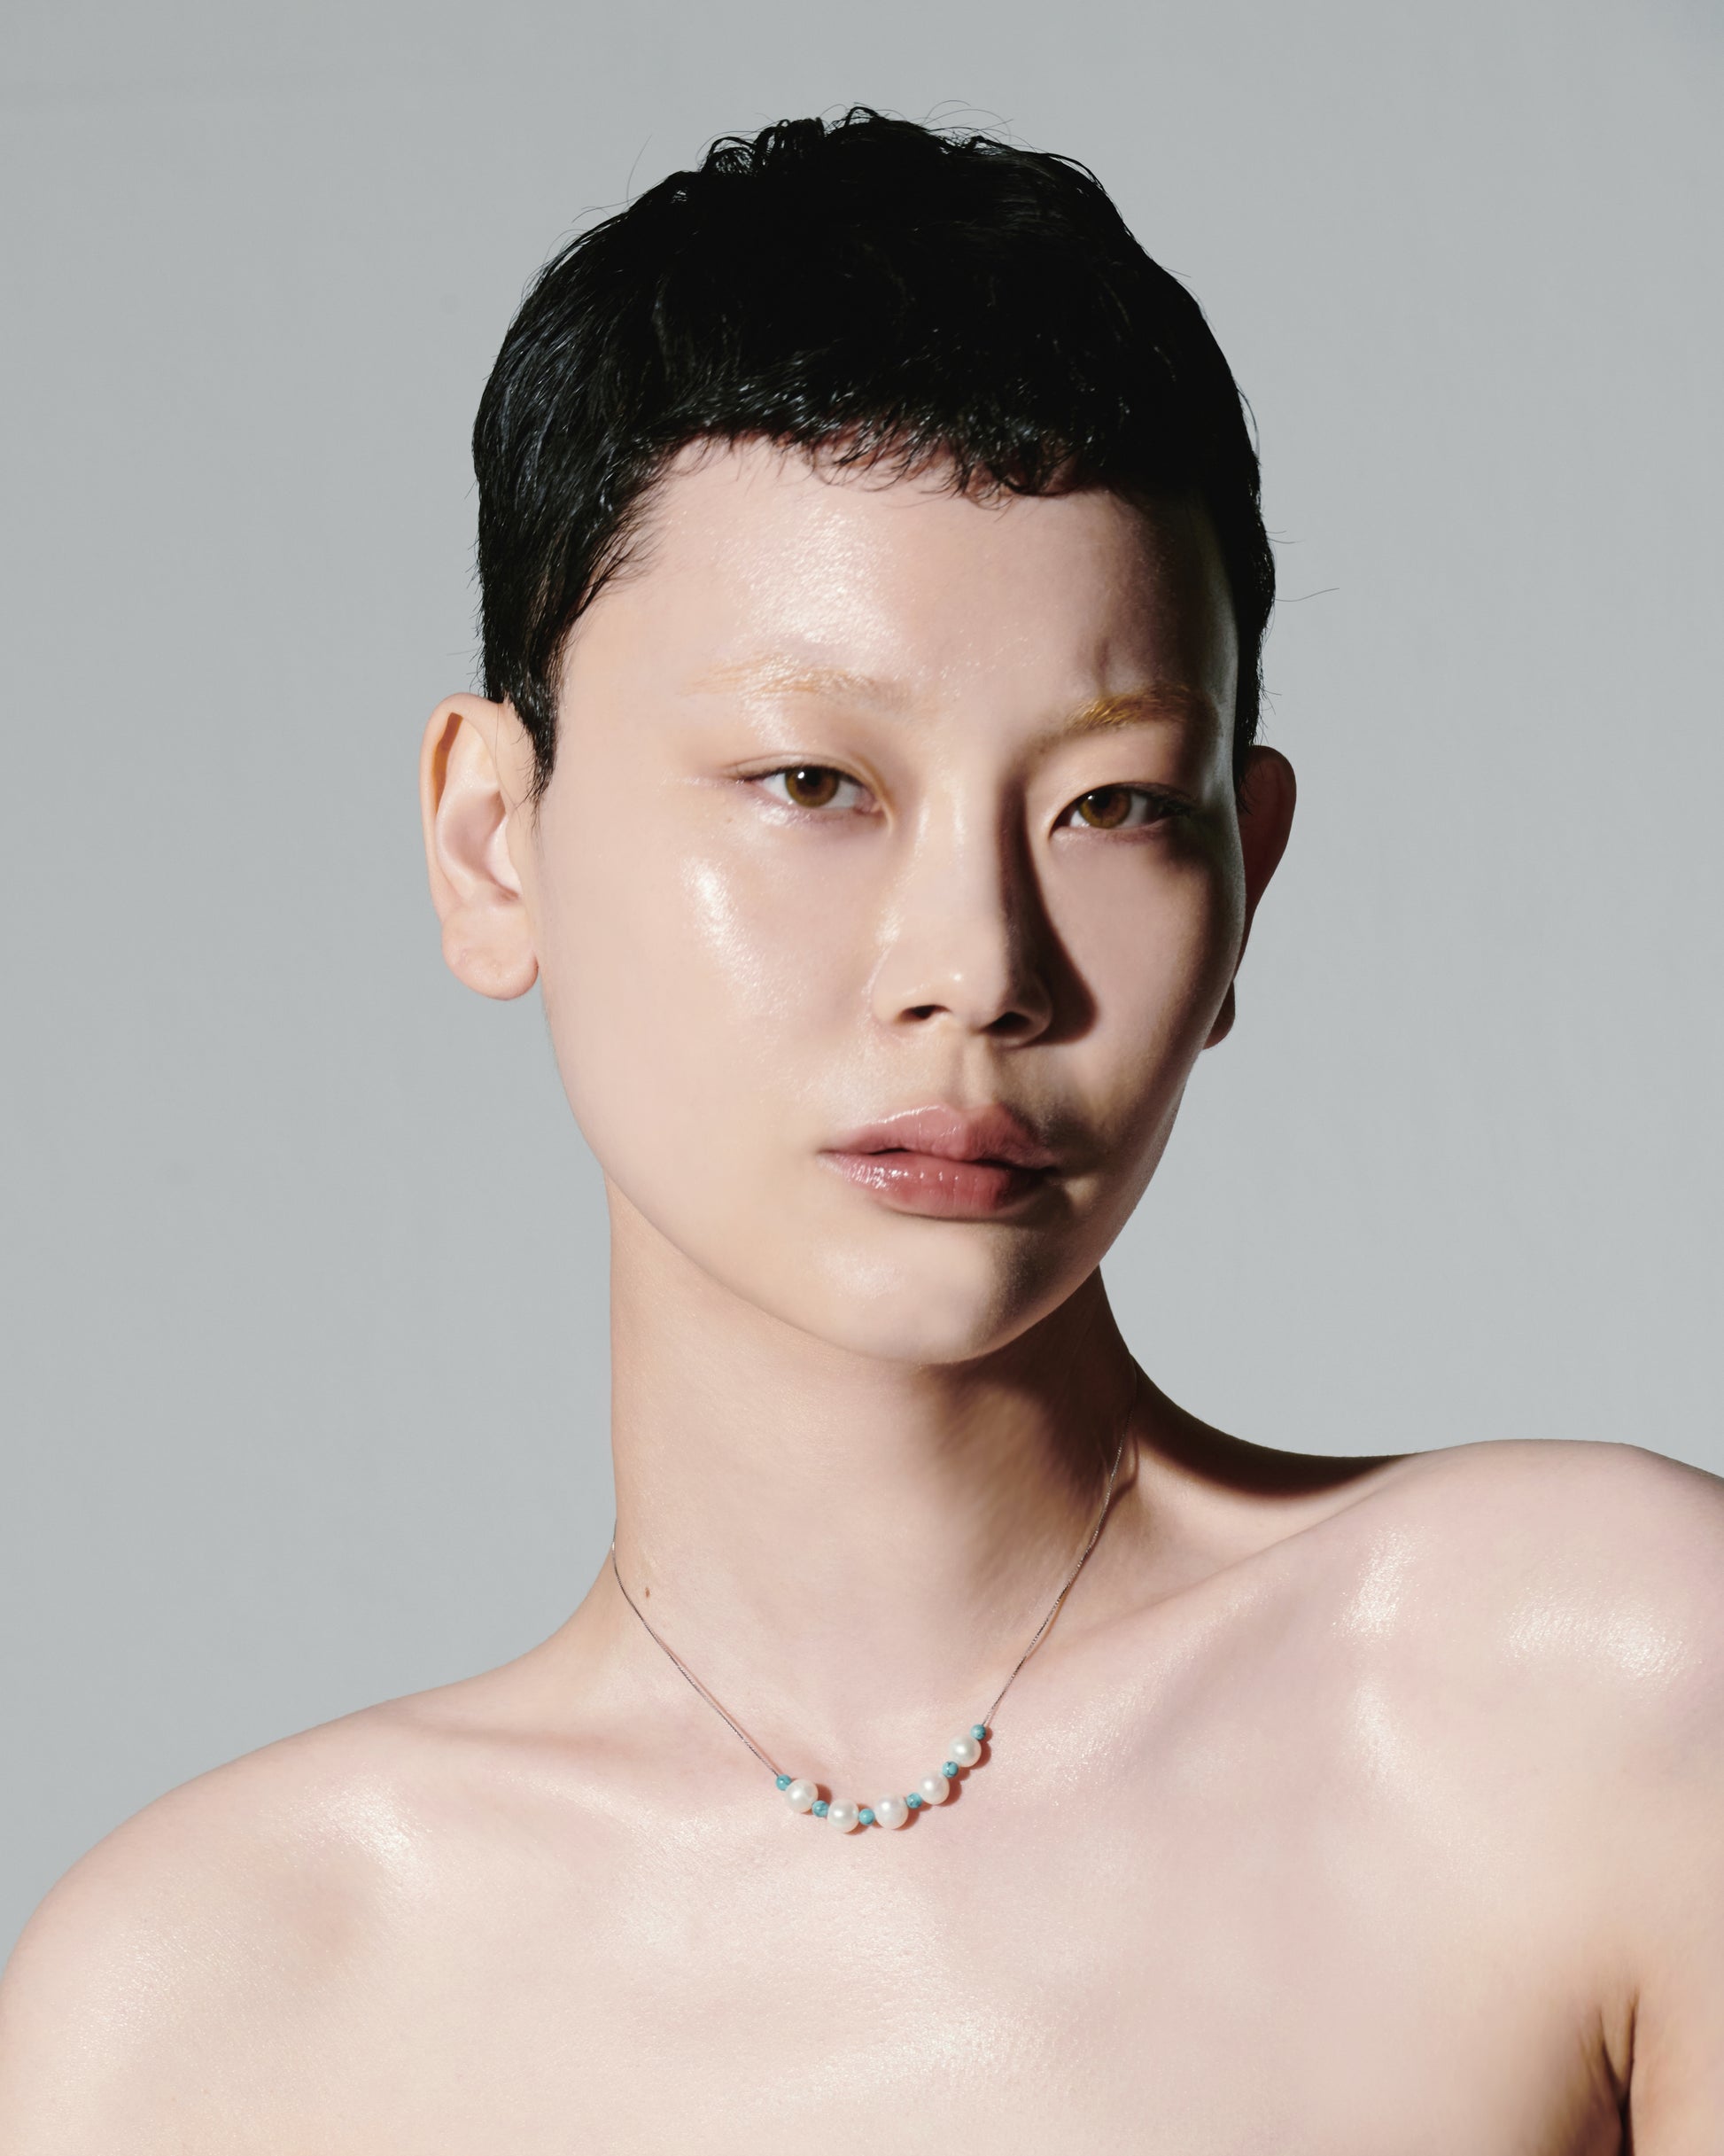 Blue Earth - 925 Sterling Silver and Turquoise Beads with Freshwater Pearls Necklace by Juxtaposition Studio Seoul Korea